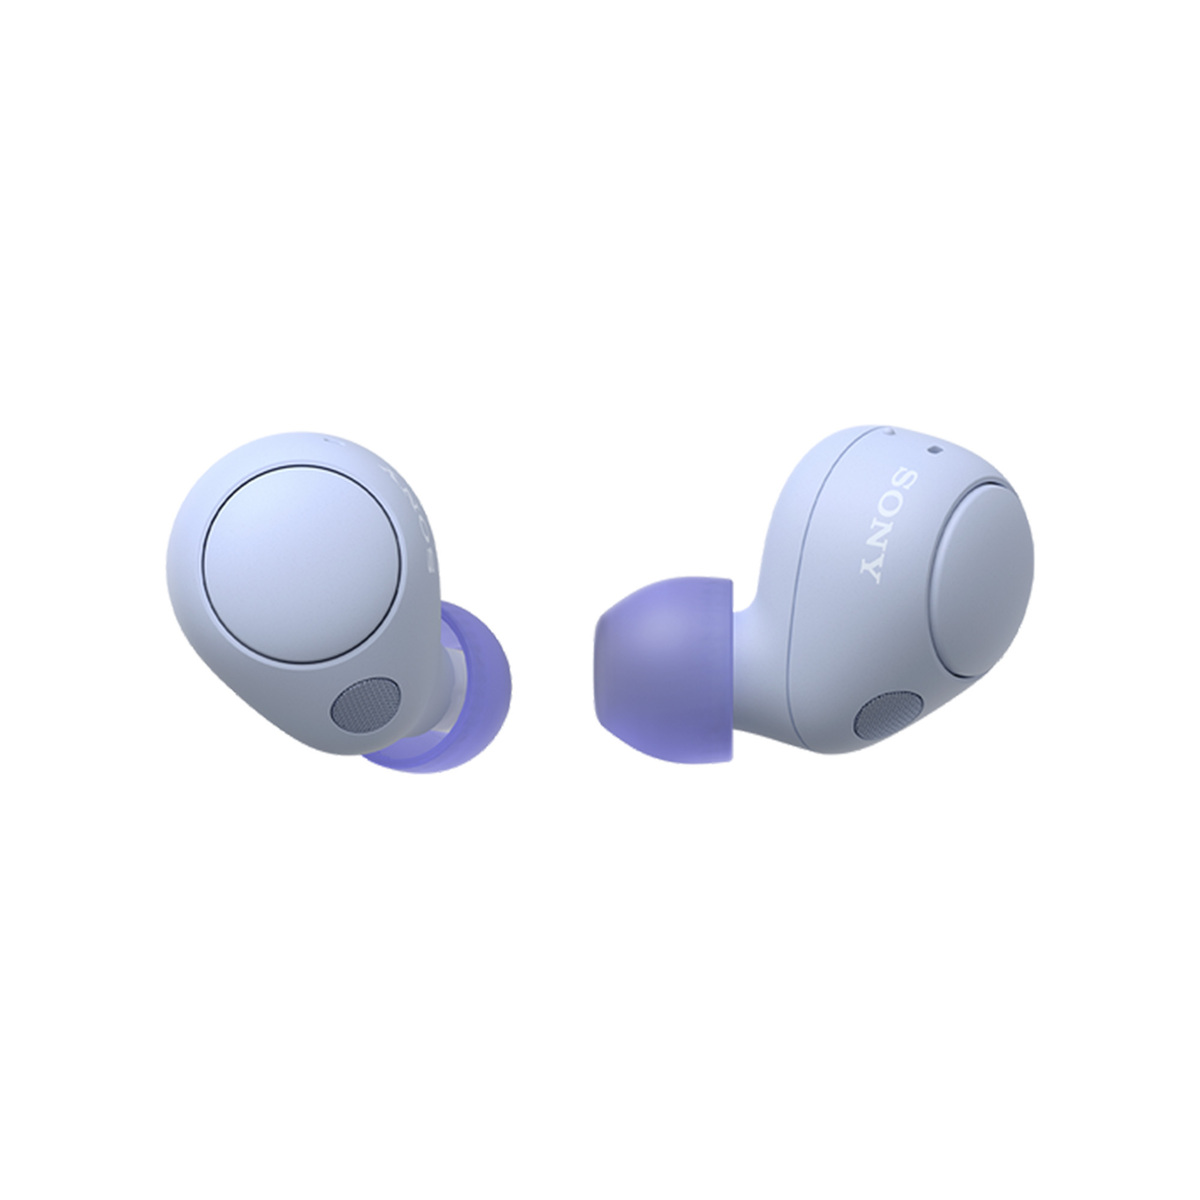 Sony True Wireless Earbuds With Noise Cancellation, Lavender, WFC700